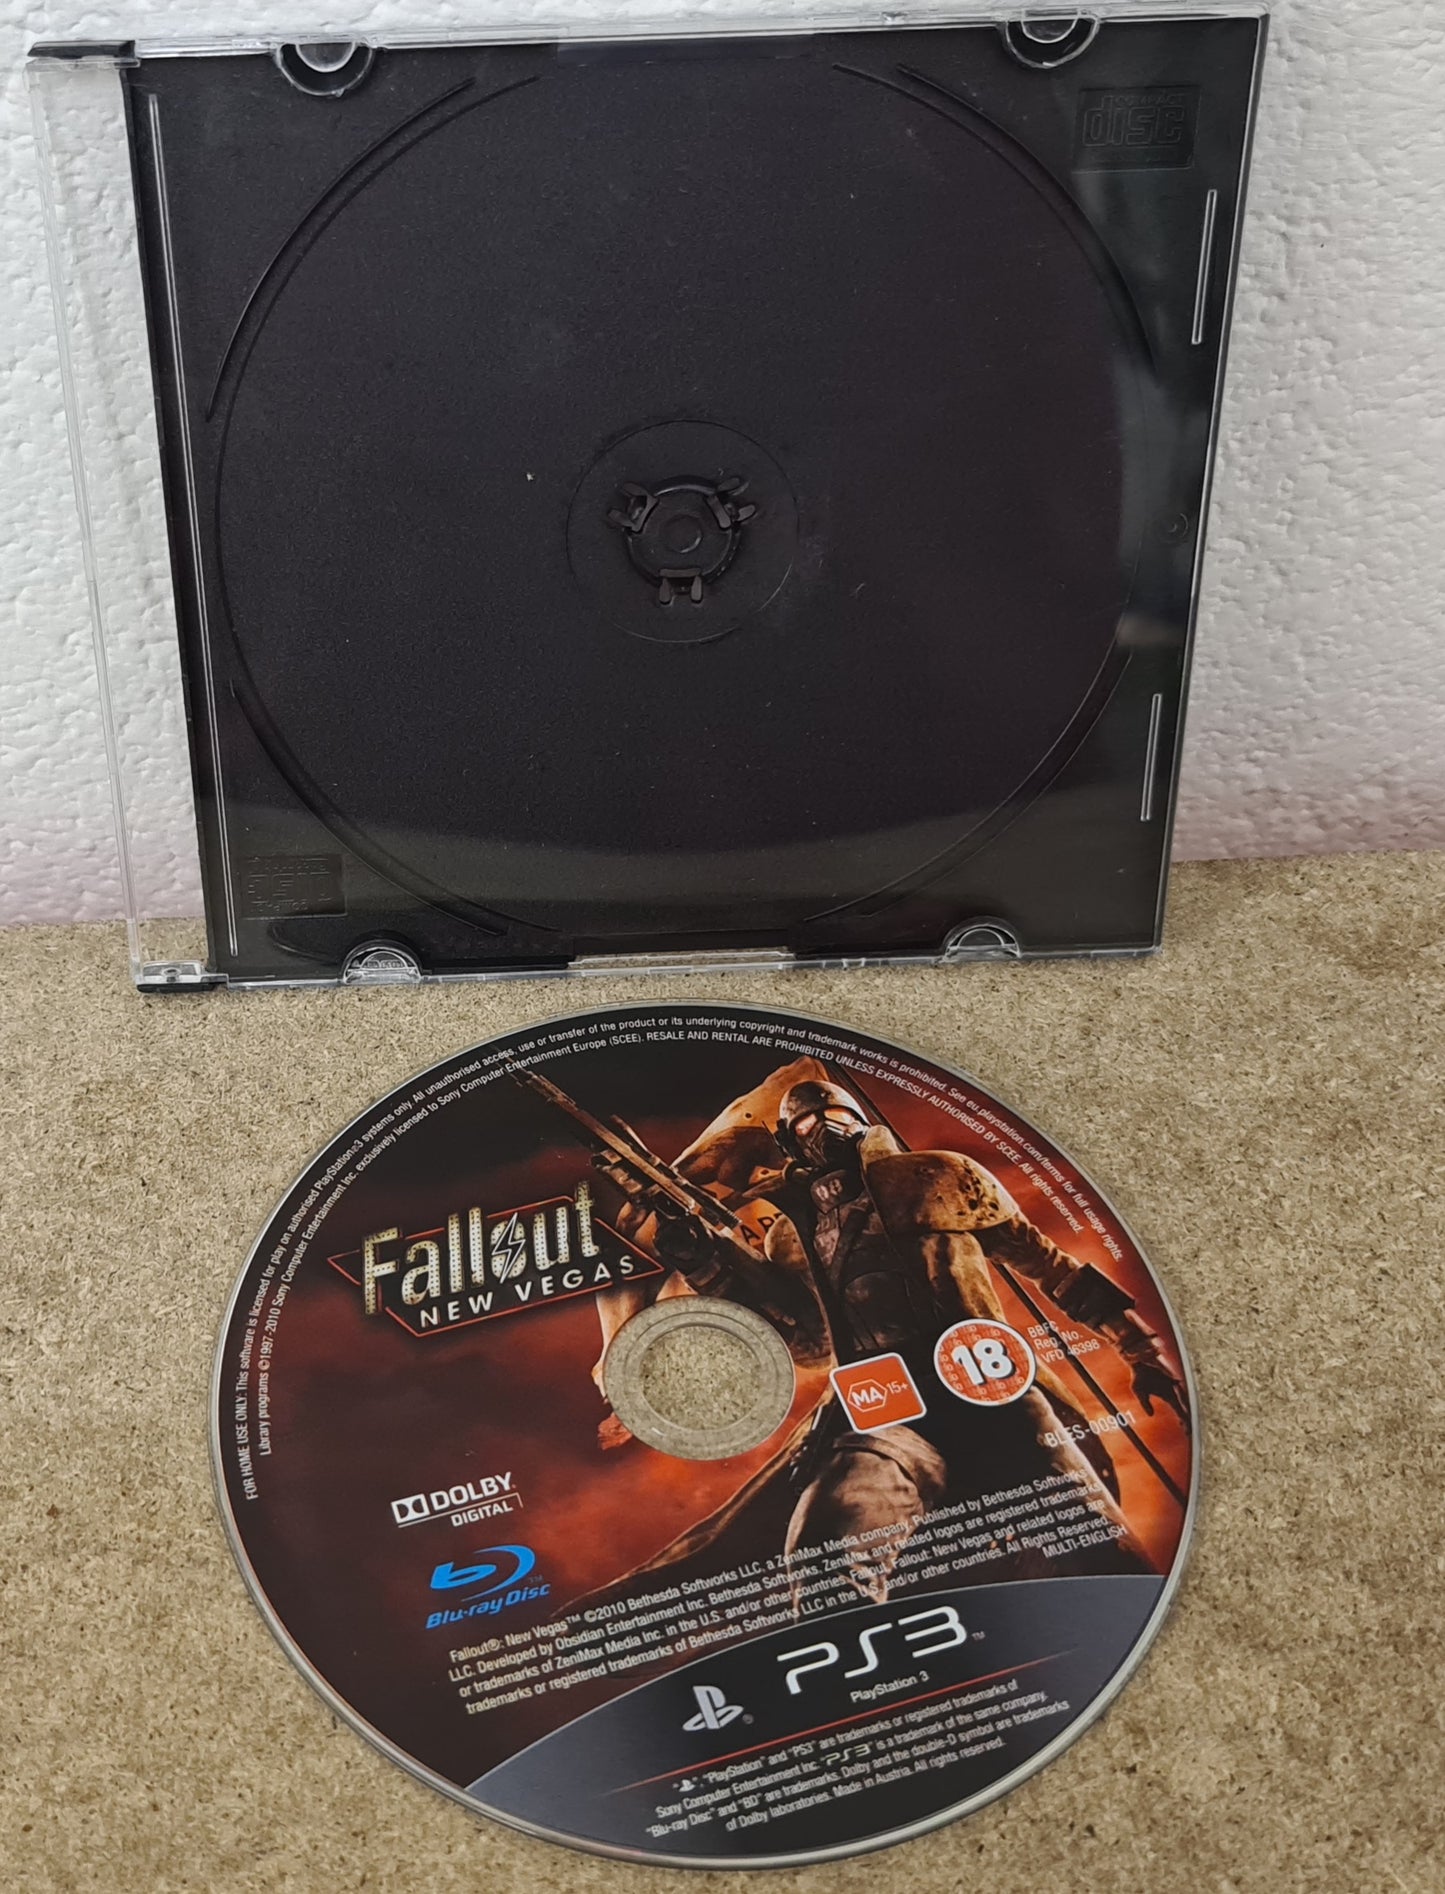 Fallout New Vegas Sony Playstation 3 (PS3) Game Disc Only